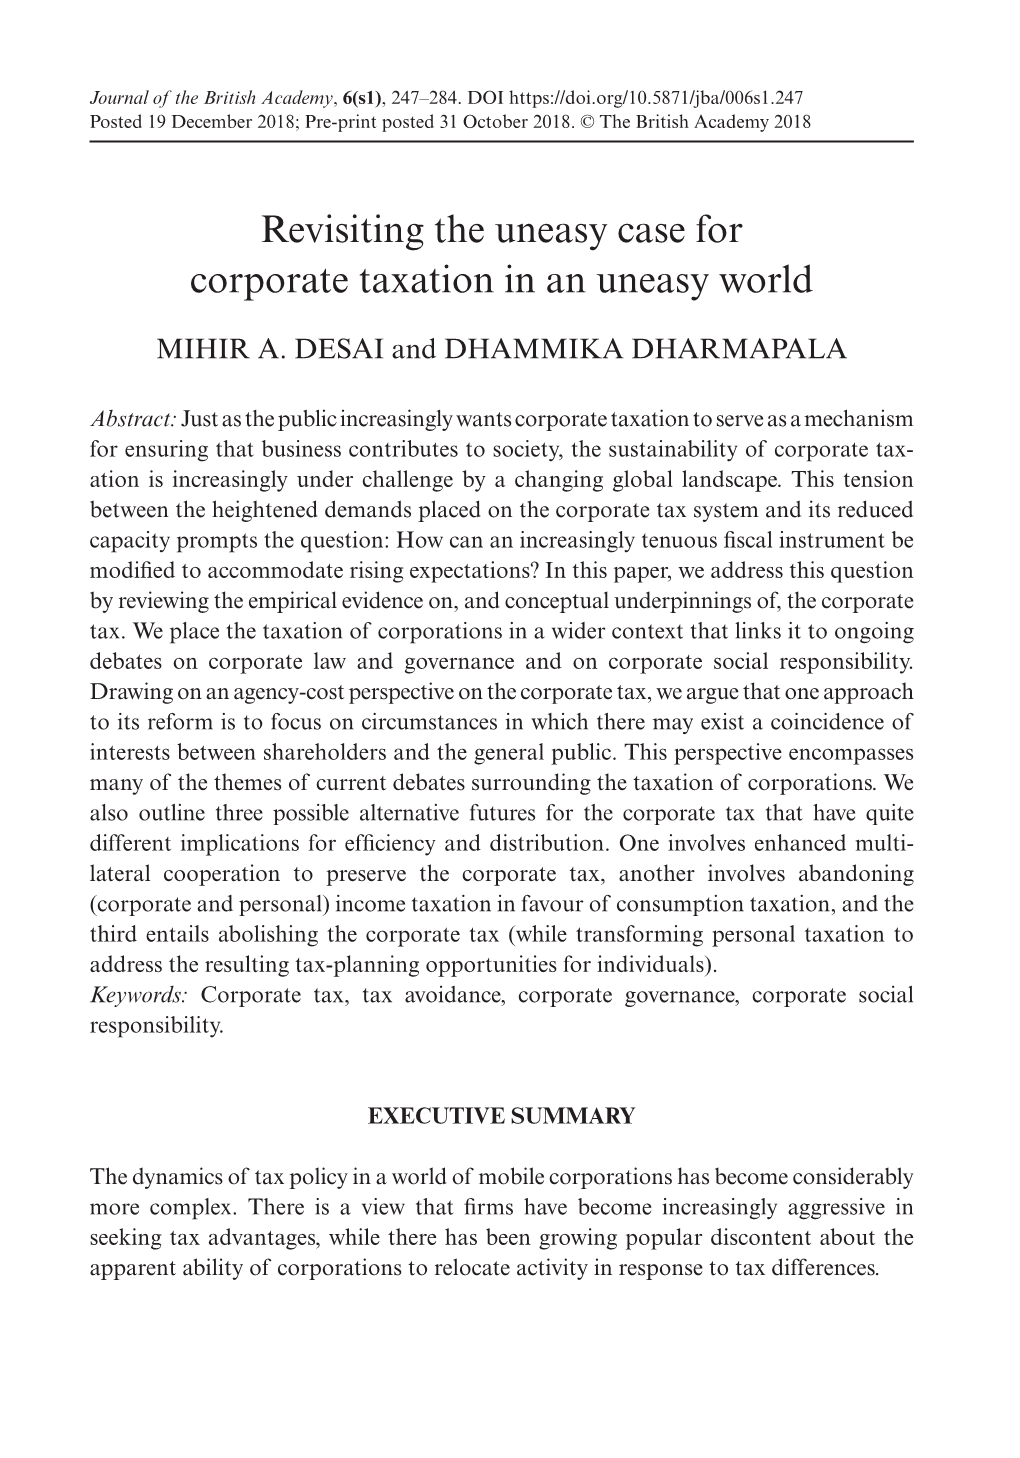 Revisiting the Uneasy Case for Corporate Taxation in an Uneasy World